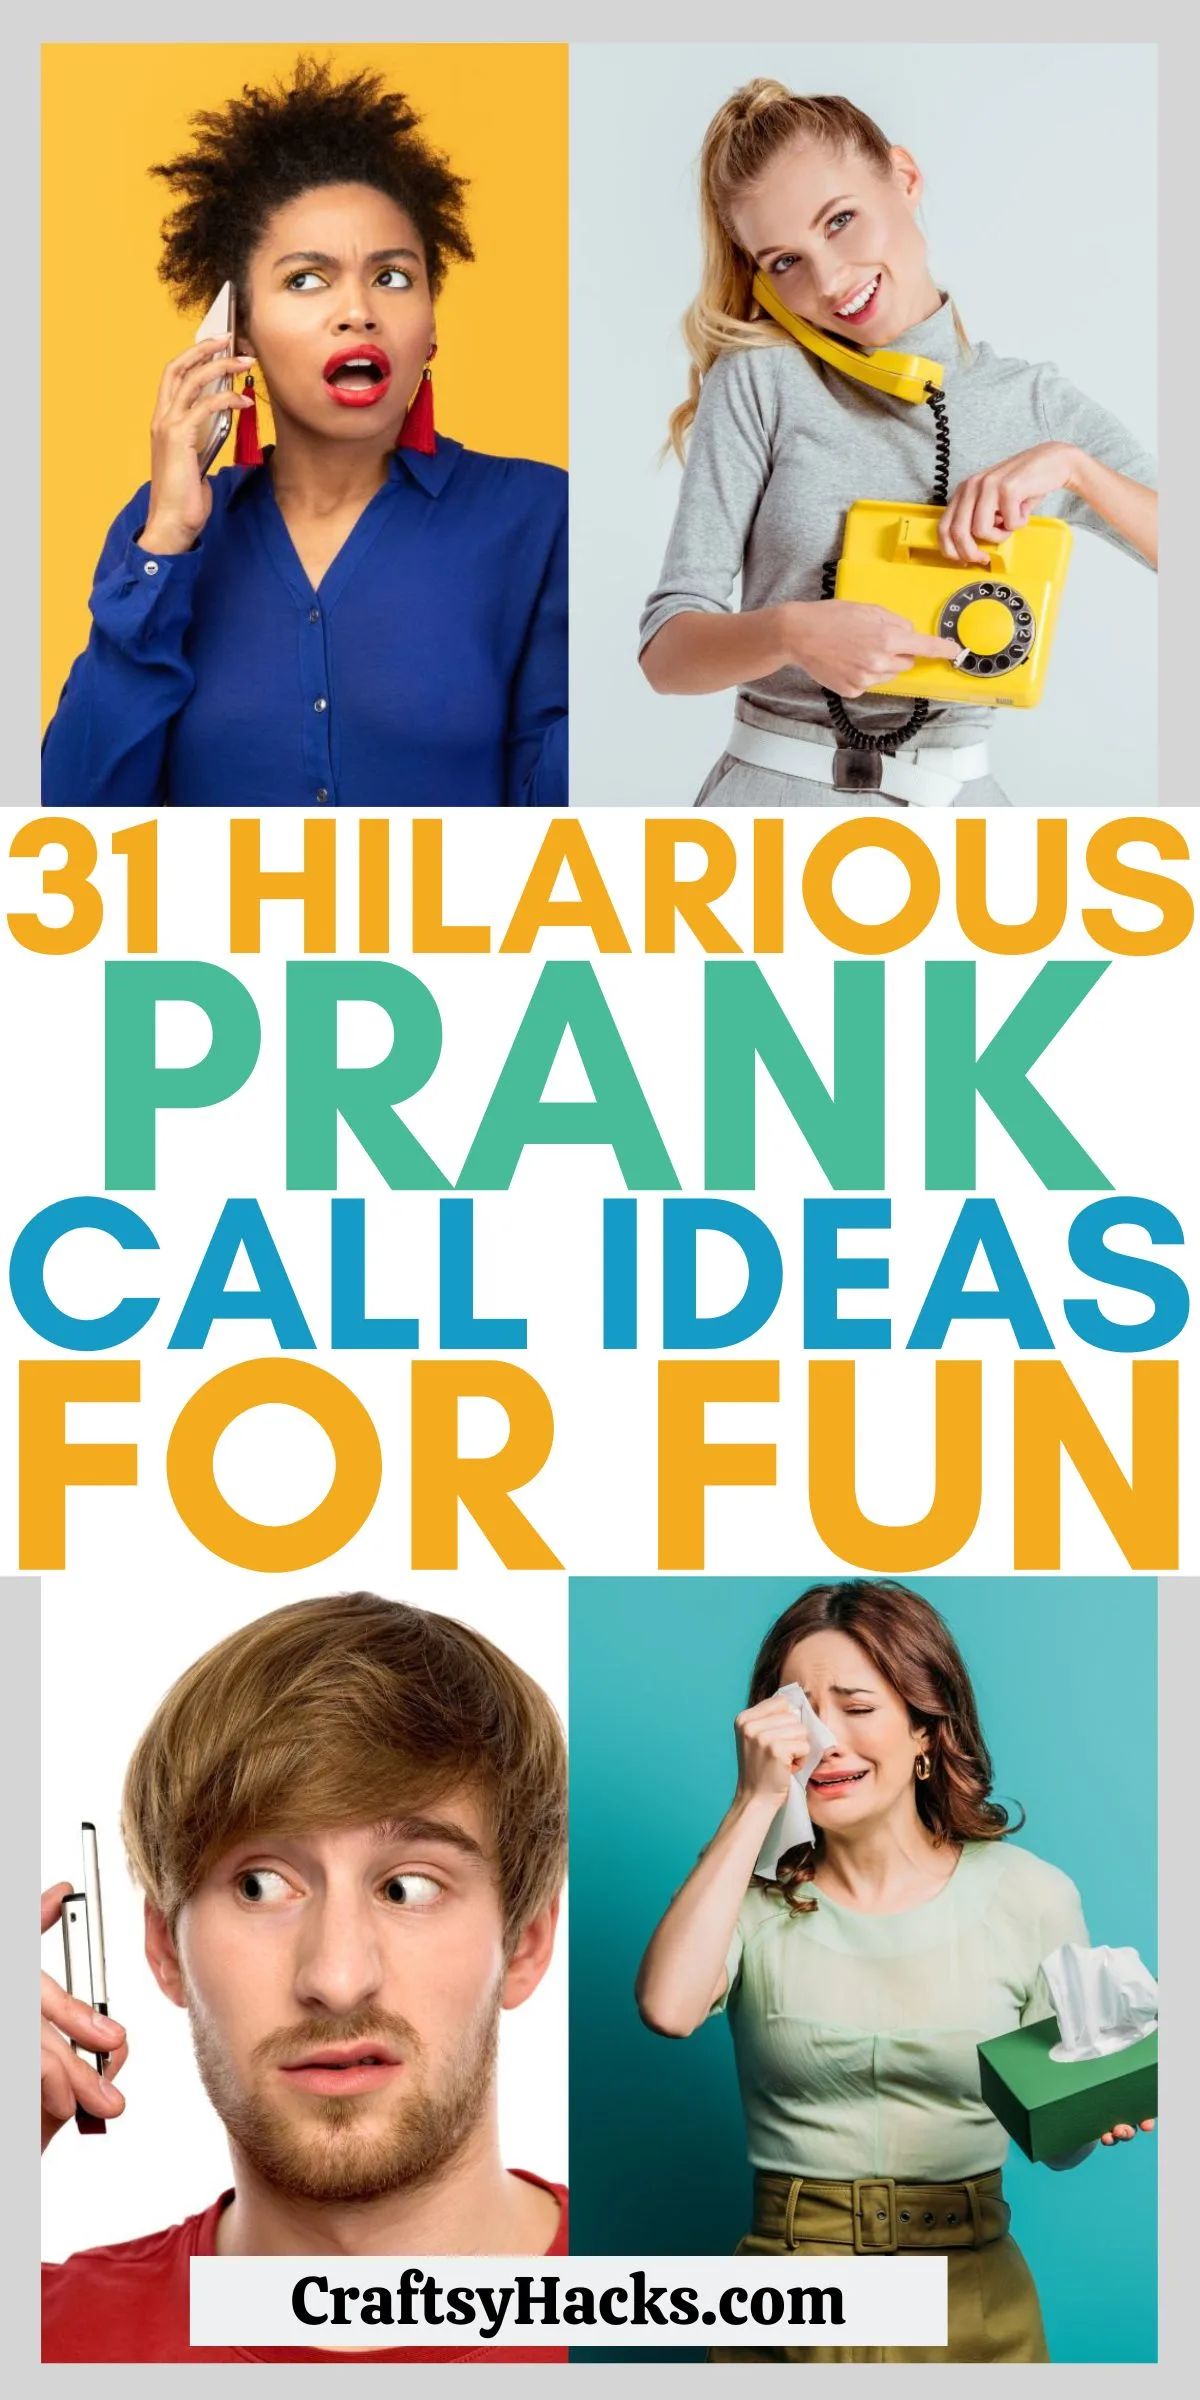 20 Funny Prank Call Ideas For When You're Really Bored